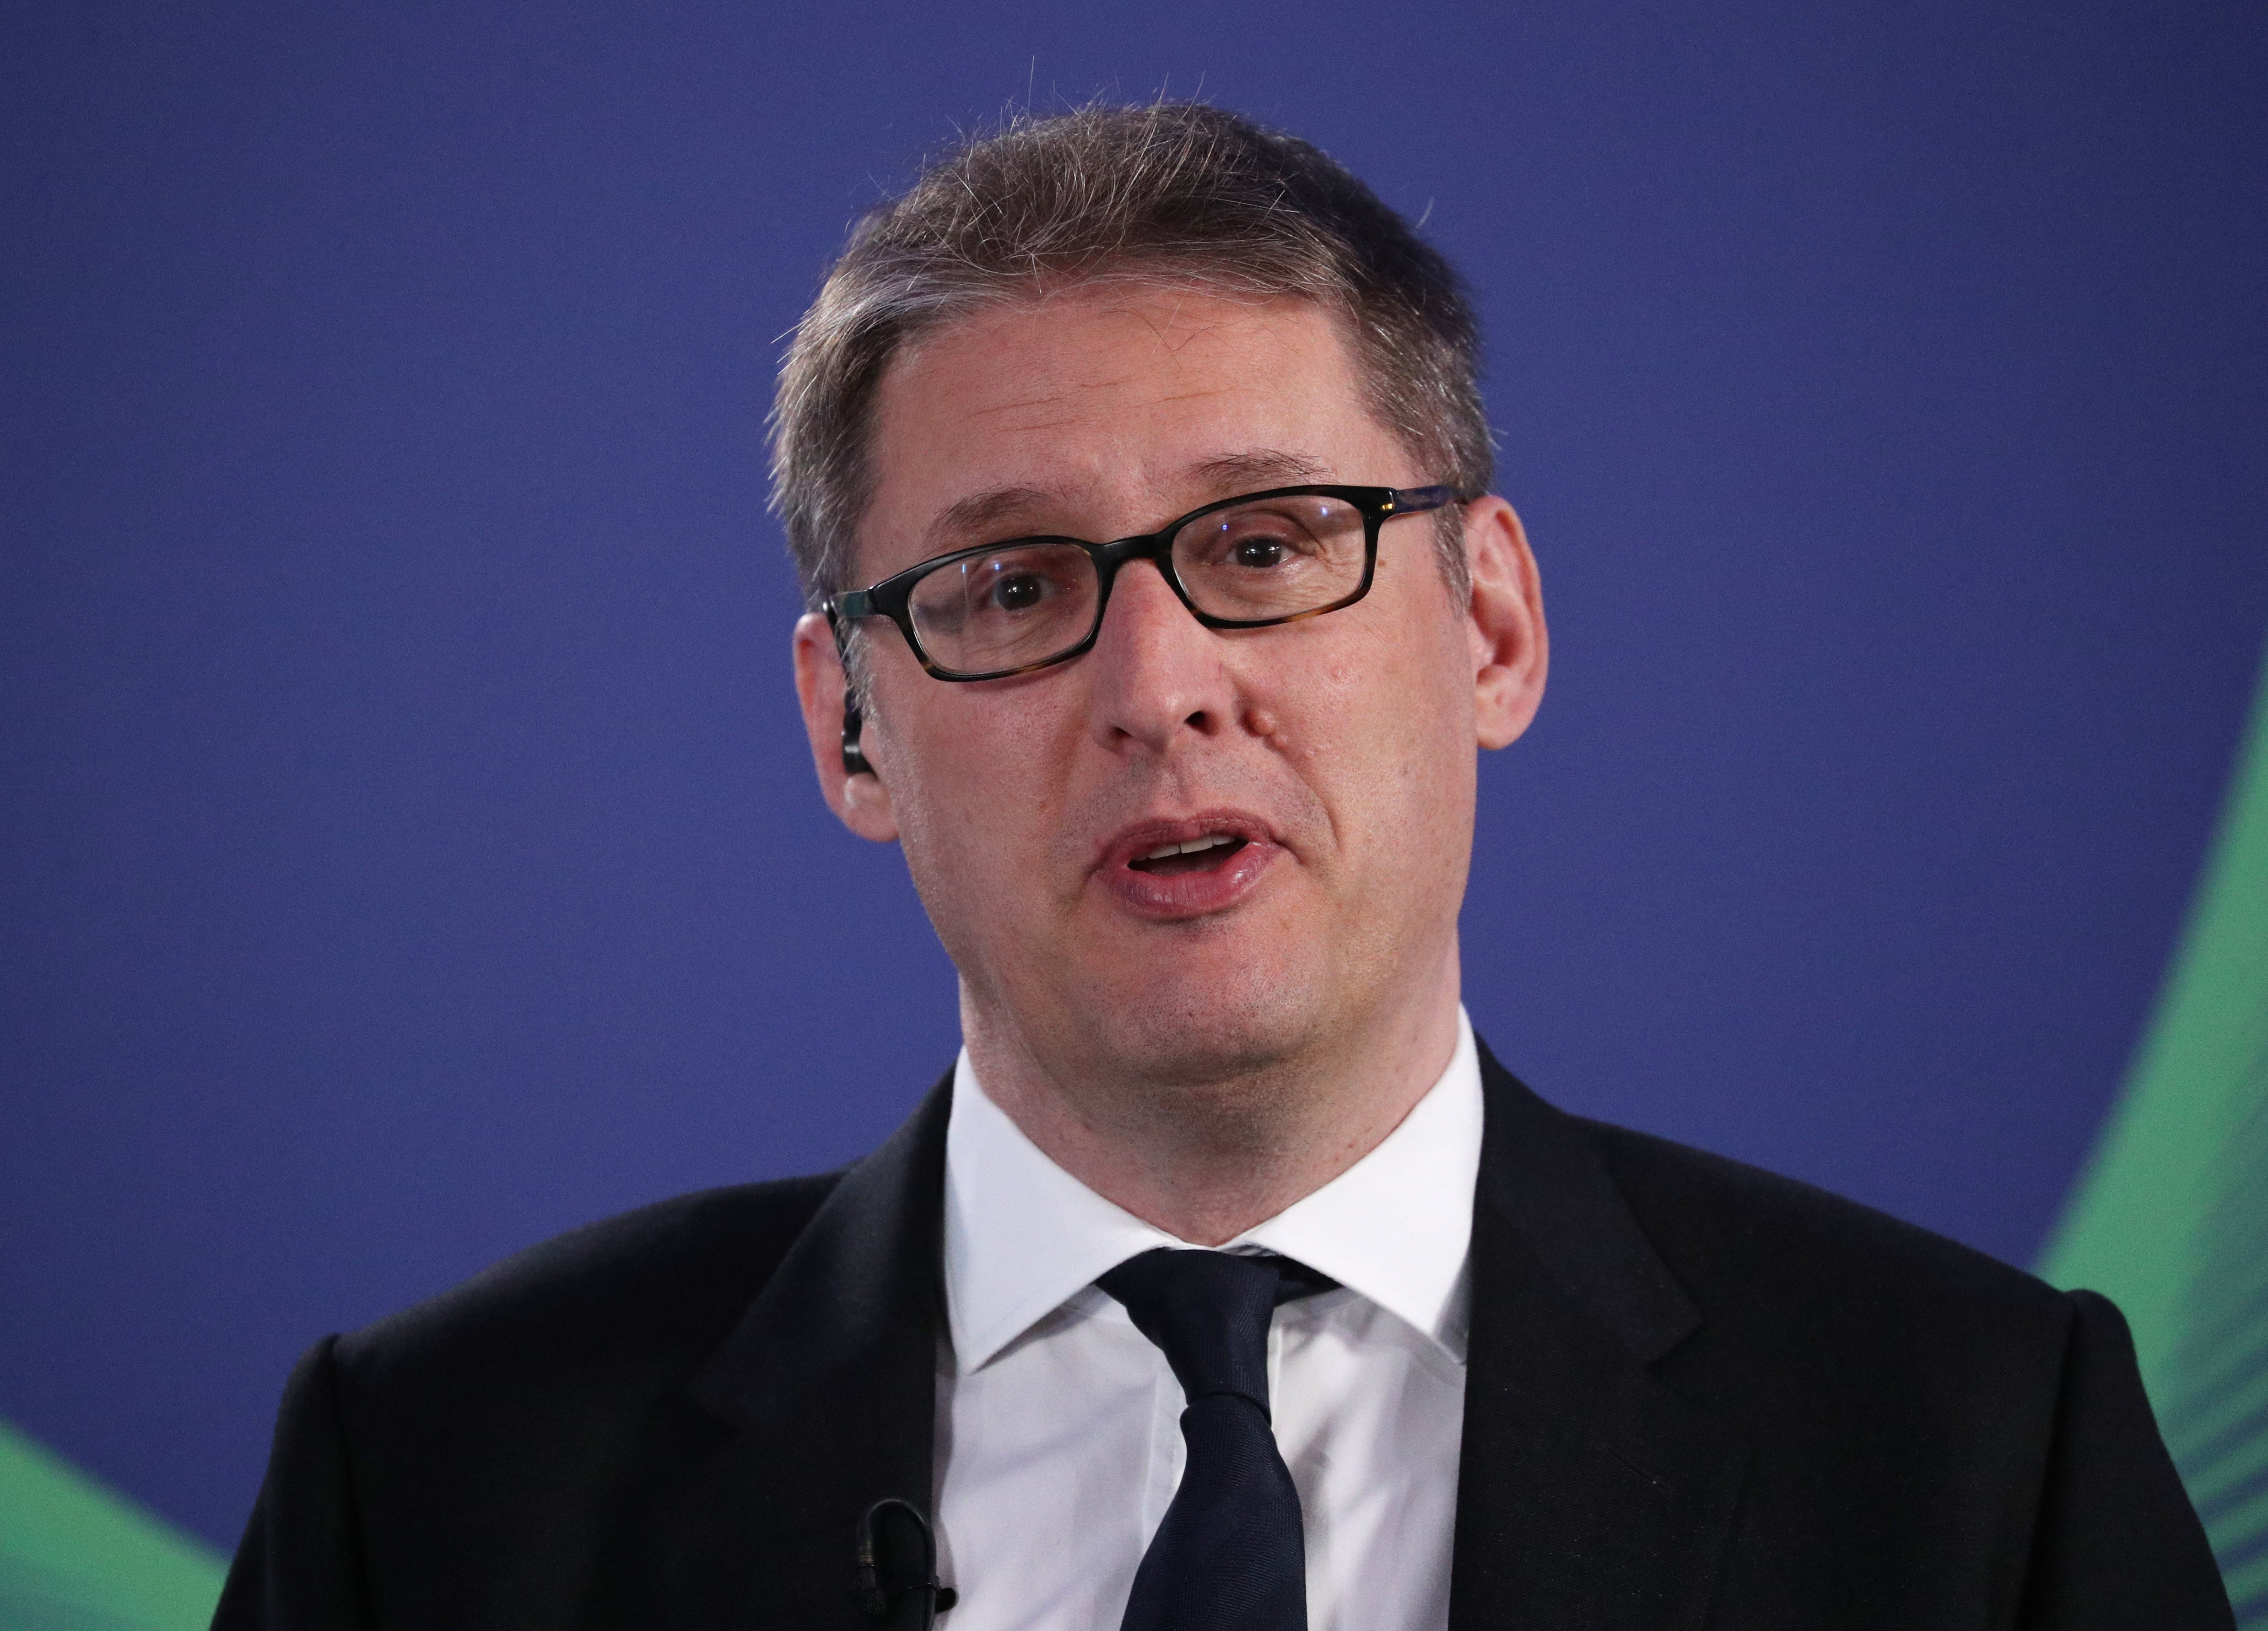 CBI Director-General Tony Danker said the economic situation people and businesses are facing requires all hands to the pump this summer (Jonathan Brady/PA)